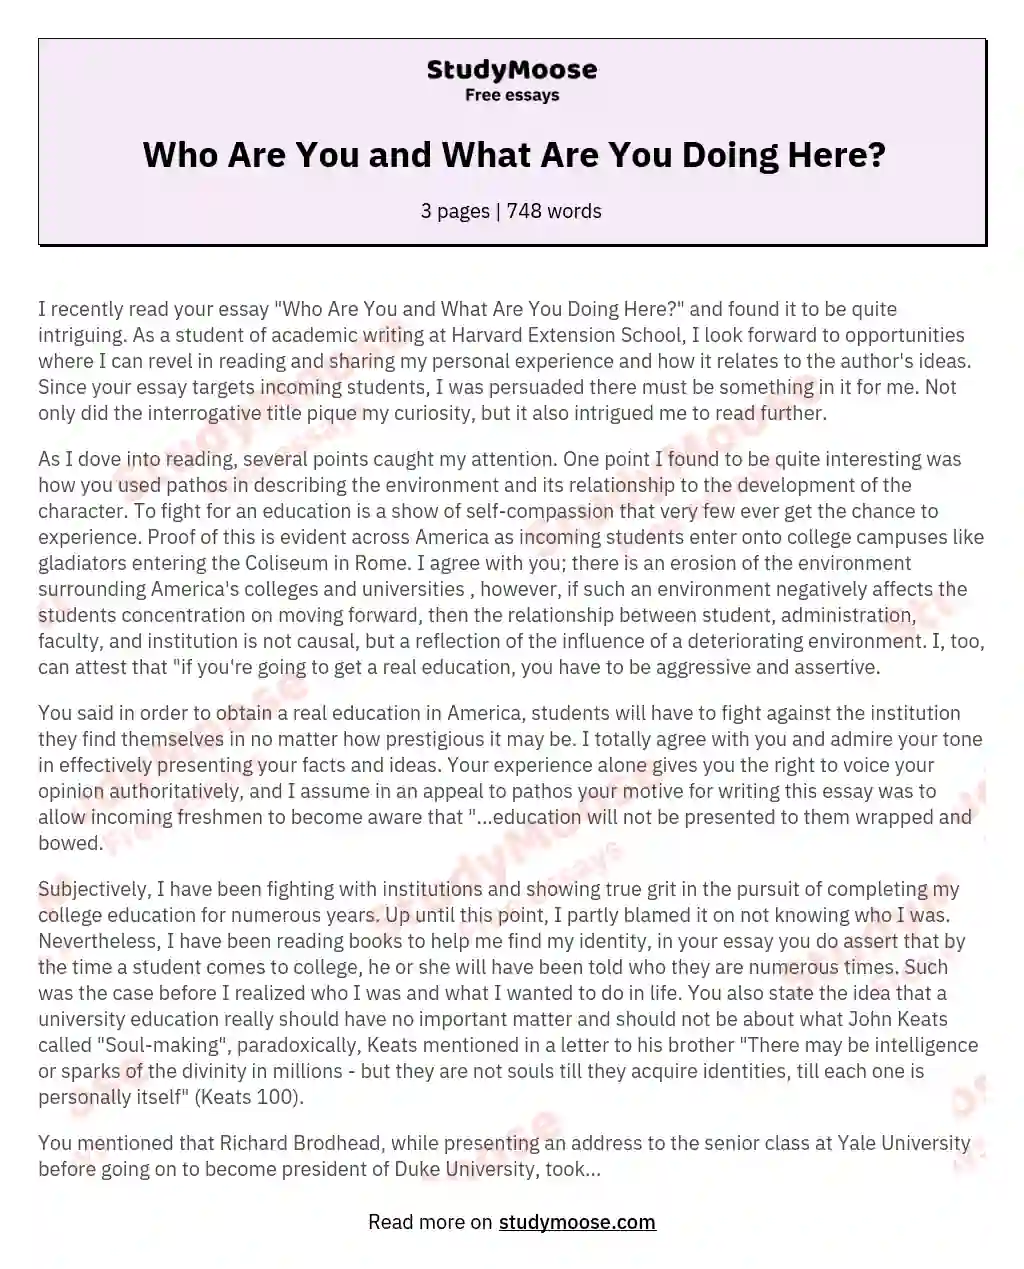 Who Are You and What Are You Doing Here? essay